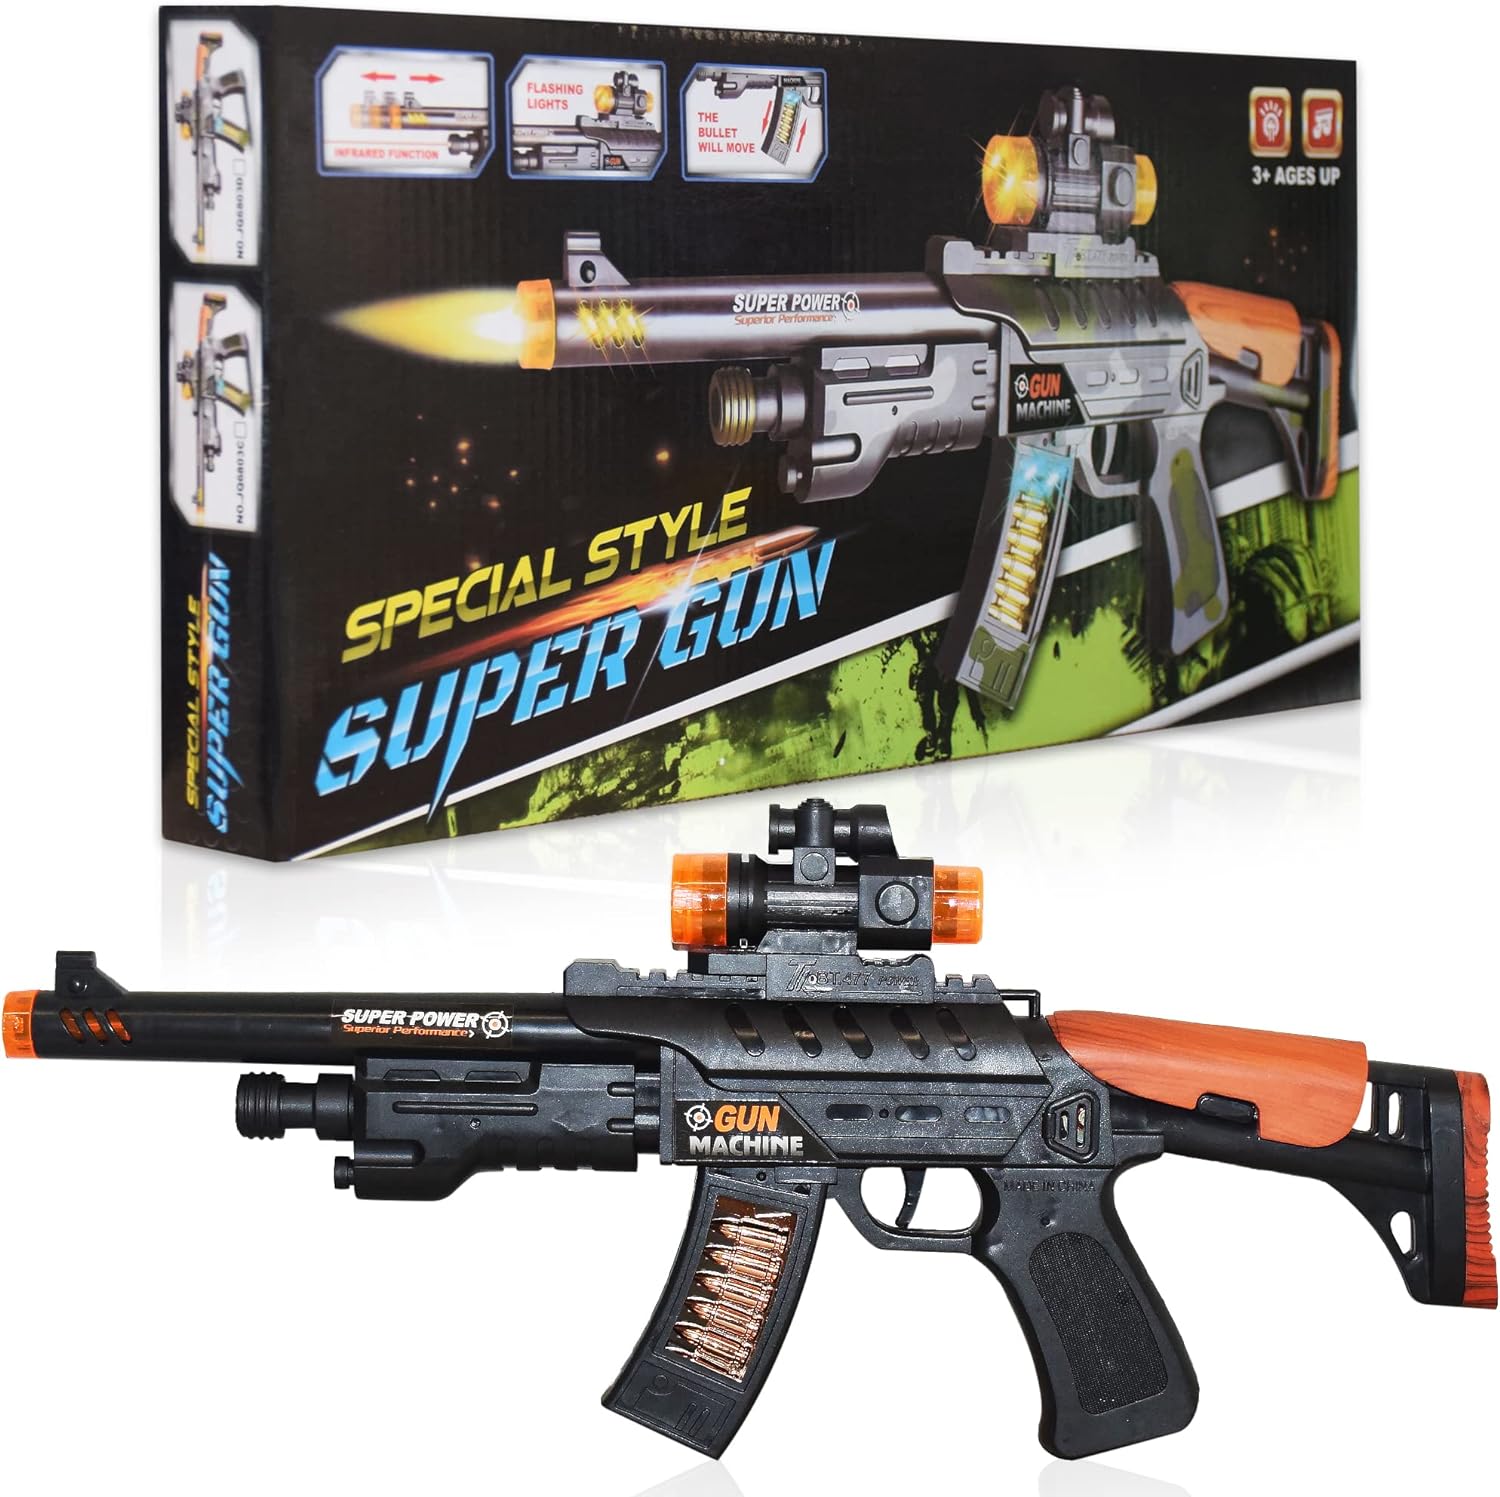 ArtCreativity Elite Ops Toy Gun for Kids - Machine Gun Toy for Boys with Moving Bullets, Flashing Lights, and Sounds Kids Guns - Battery Operated Toy Gun for Kids 8,9,10,11,12, in Colorful Gift Box